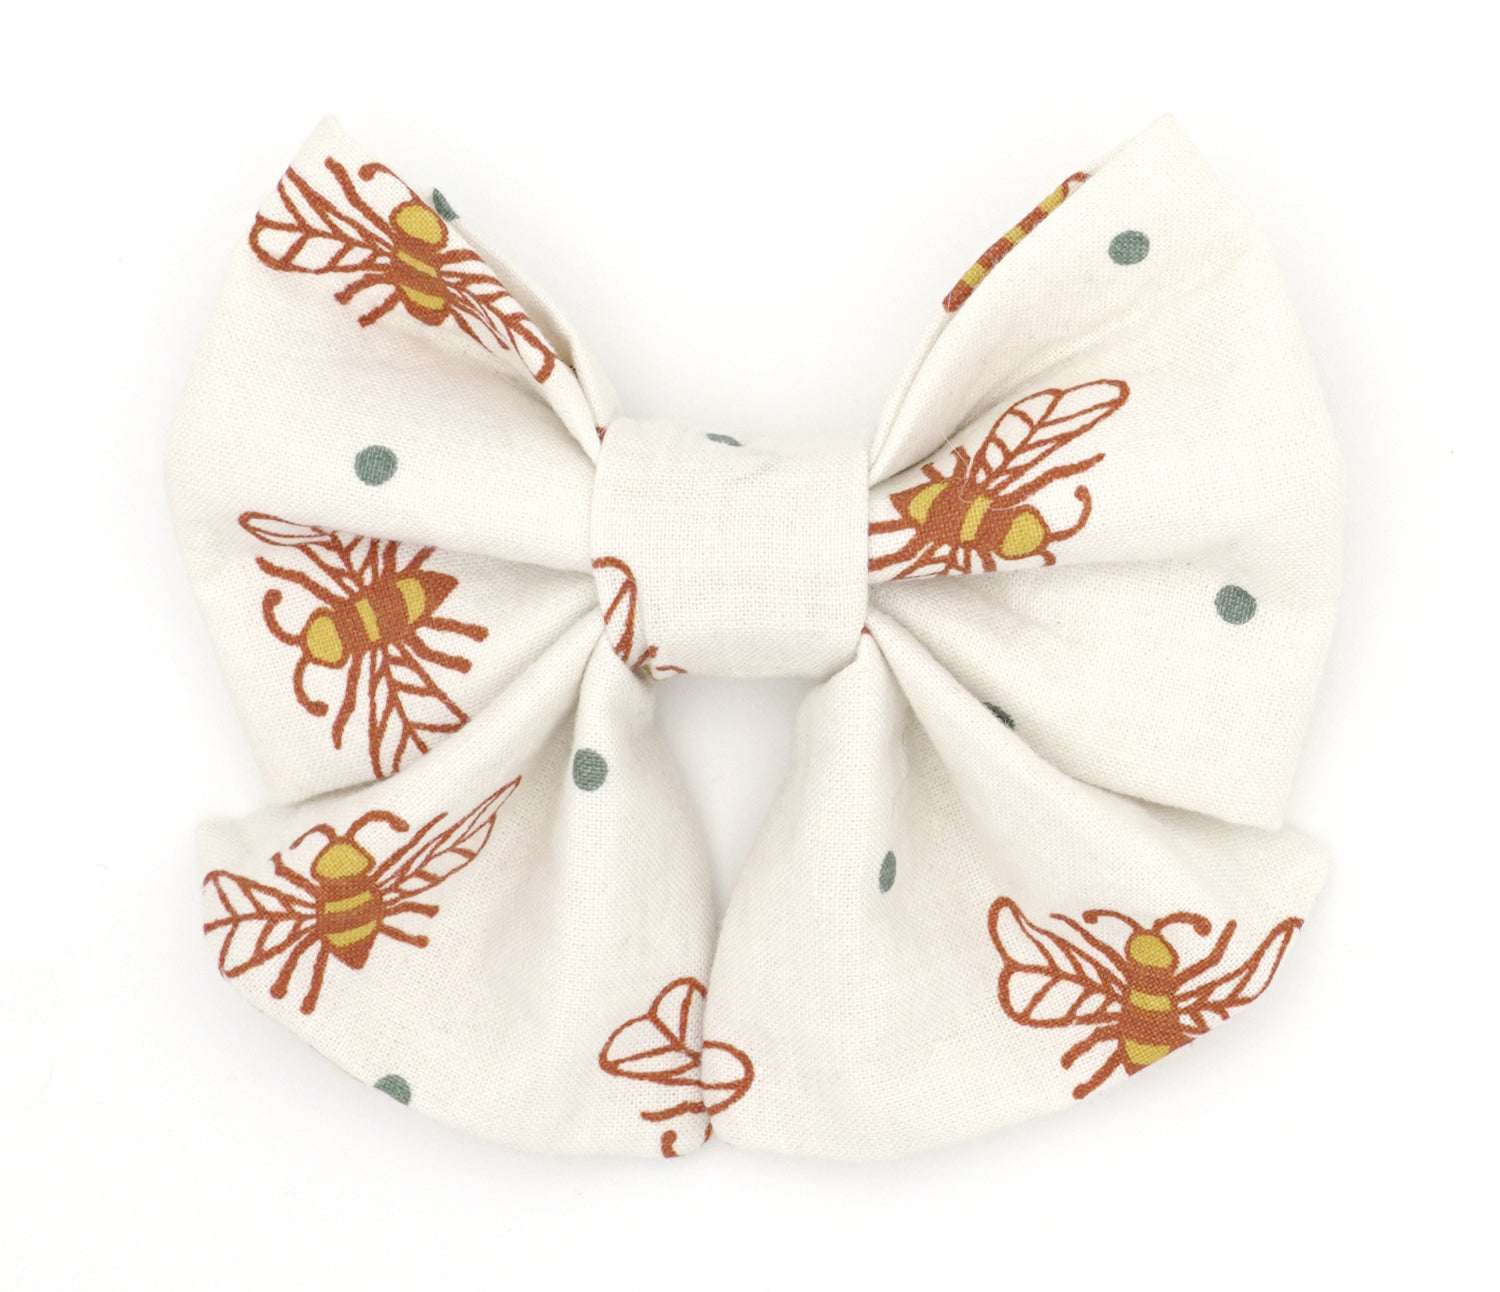 Handmade cotton bow tie with tails for dogs (or other pets). Elastic straps on back with snaps make it easy to add to collar, harness, or leash. Cream background with orange and yellow bees, and grey/green polka dots.